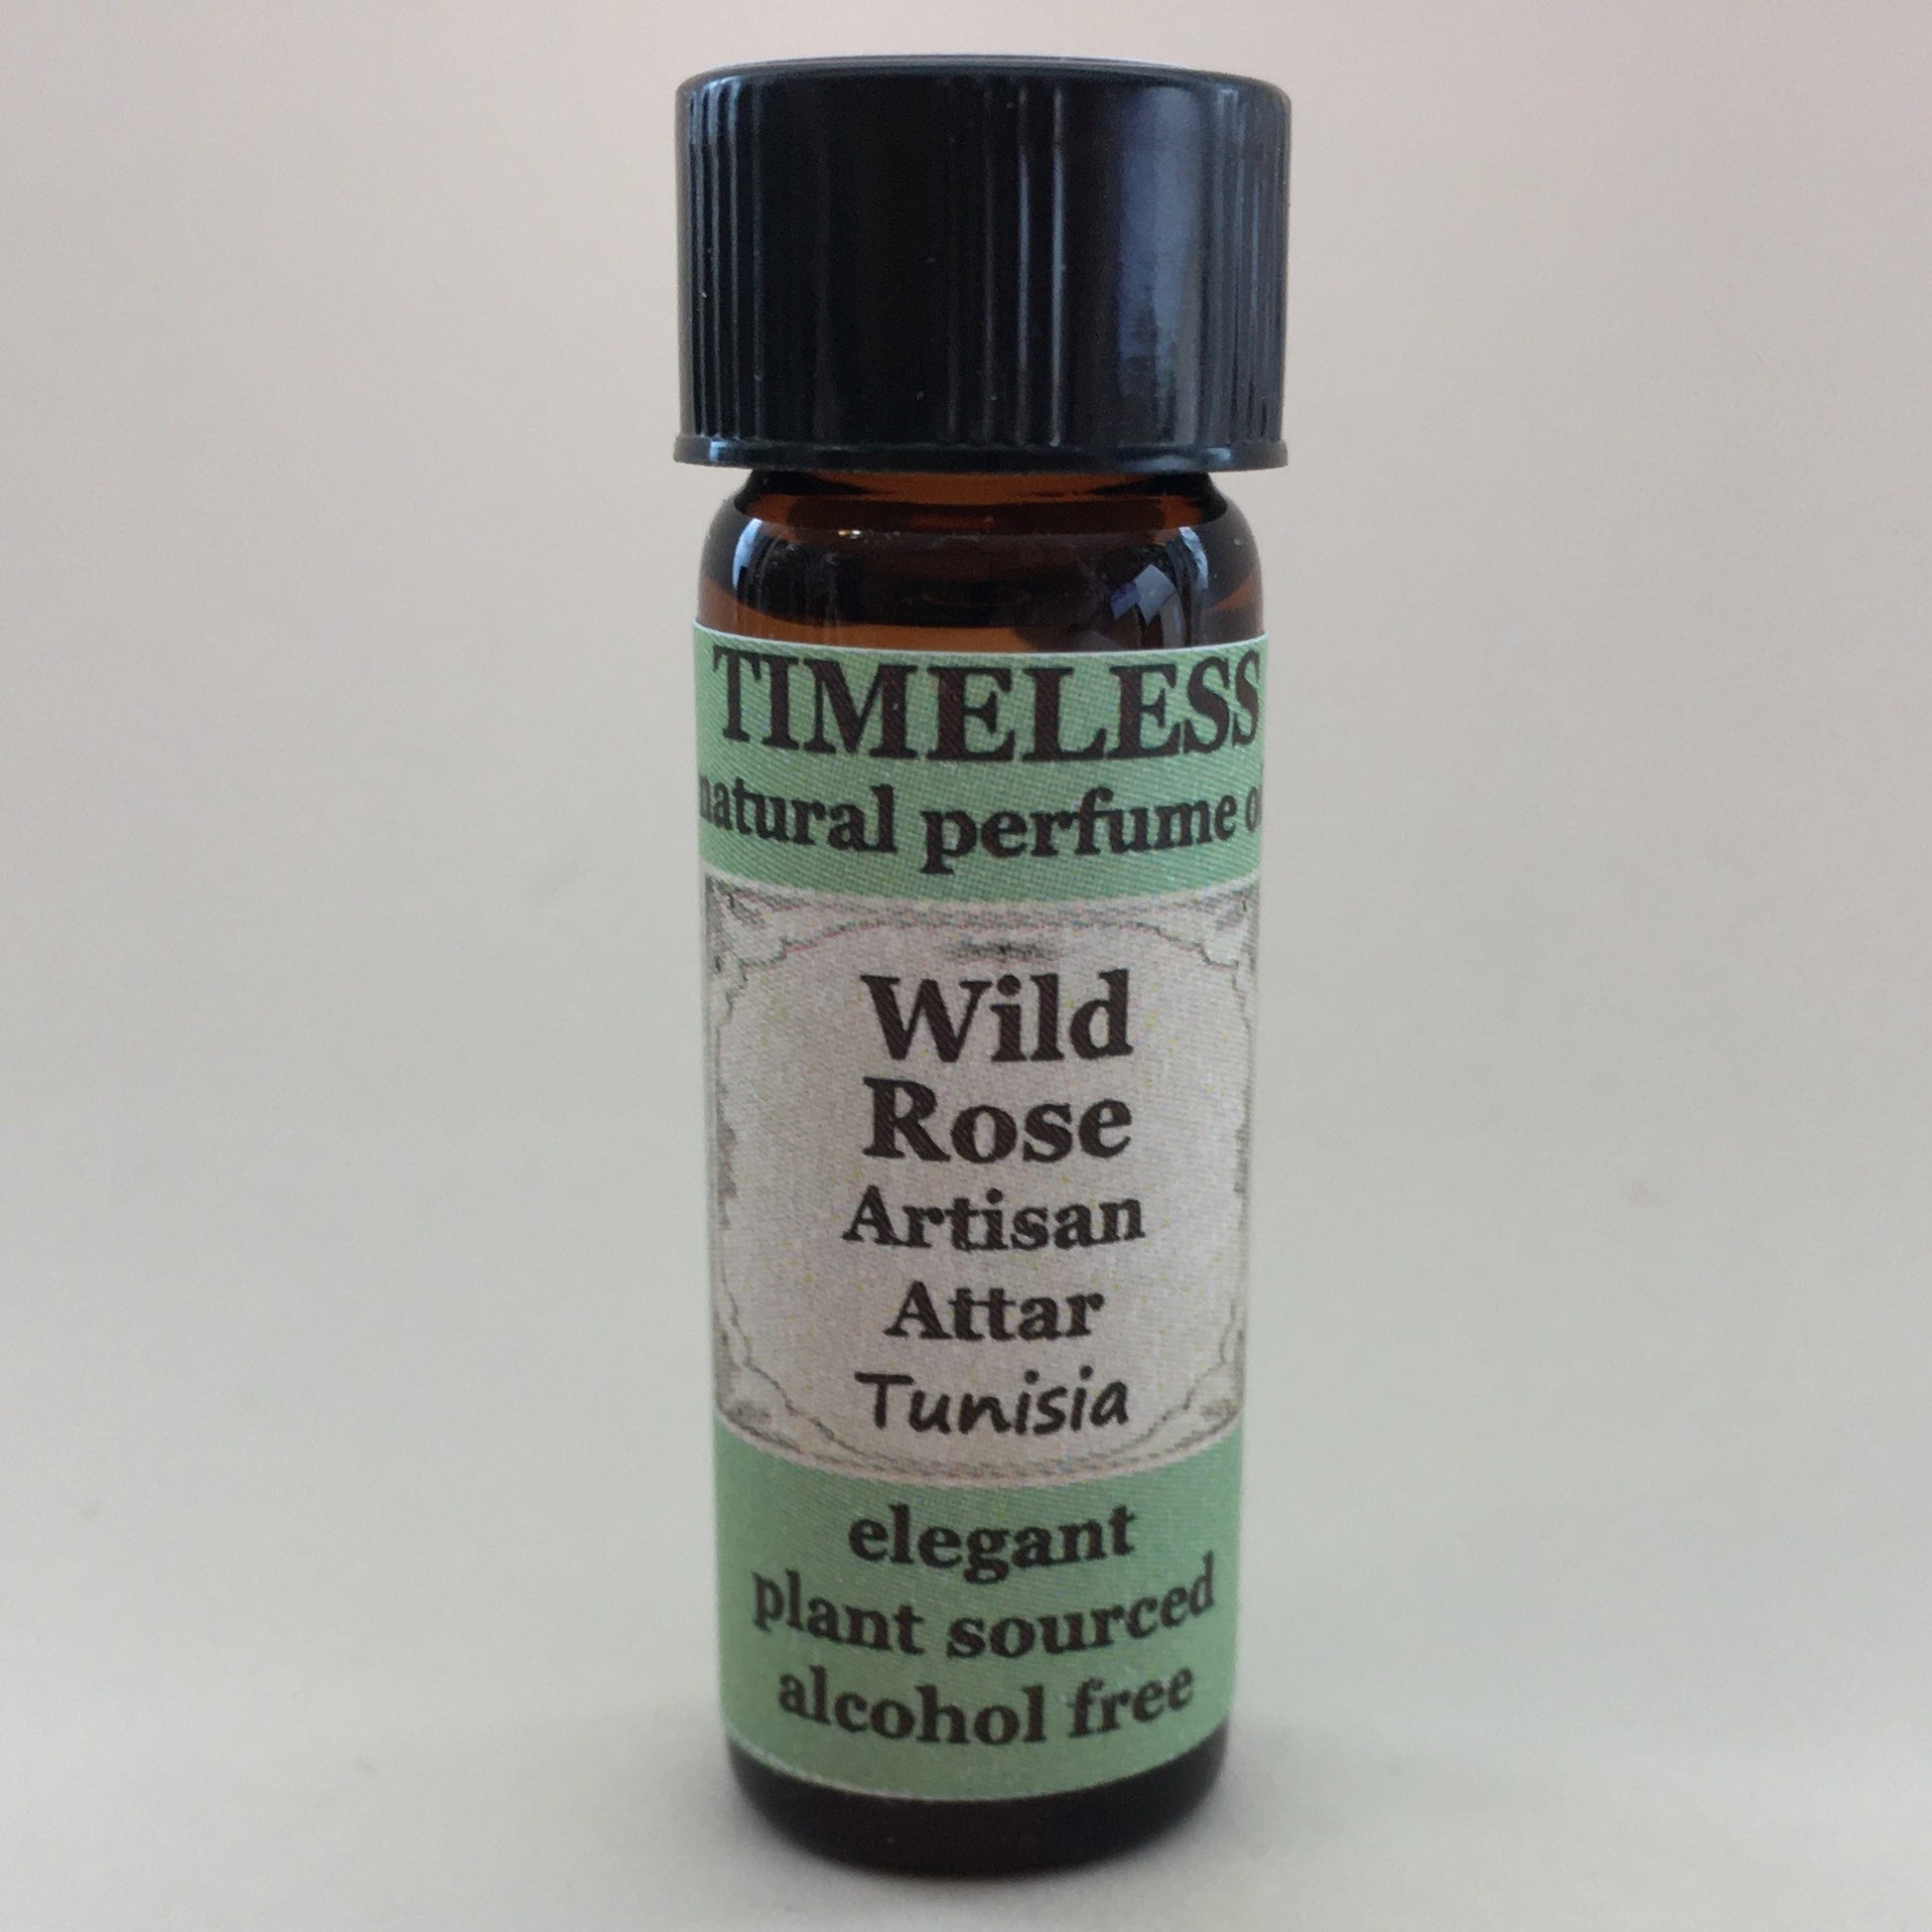 TIMELESS Wild Rose Attar is sweet, seductive, and suggests a bit of mystery.  